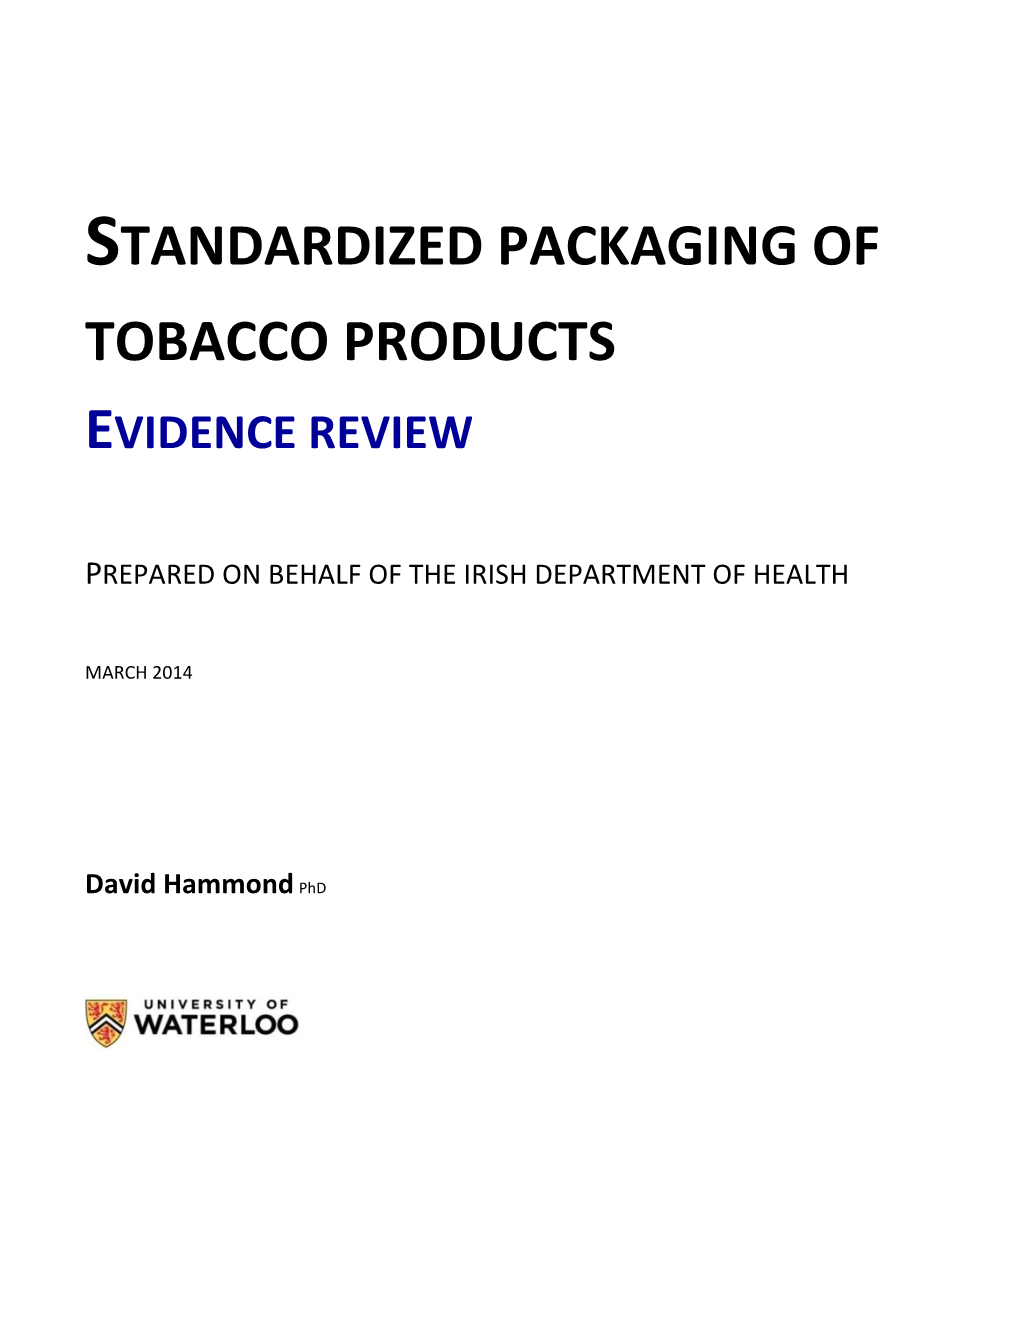 Standardized Packaging of Tobacco Products Evidence Review